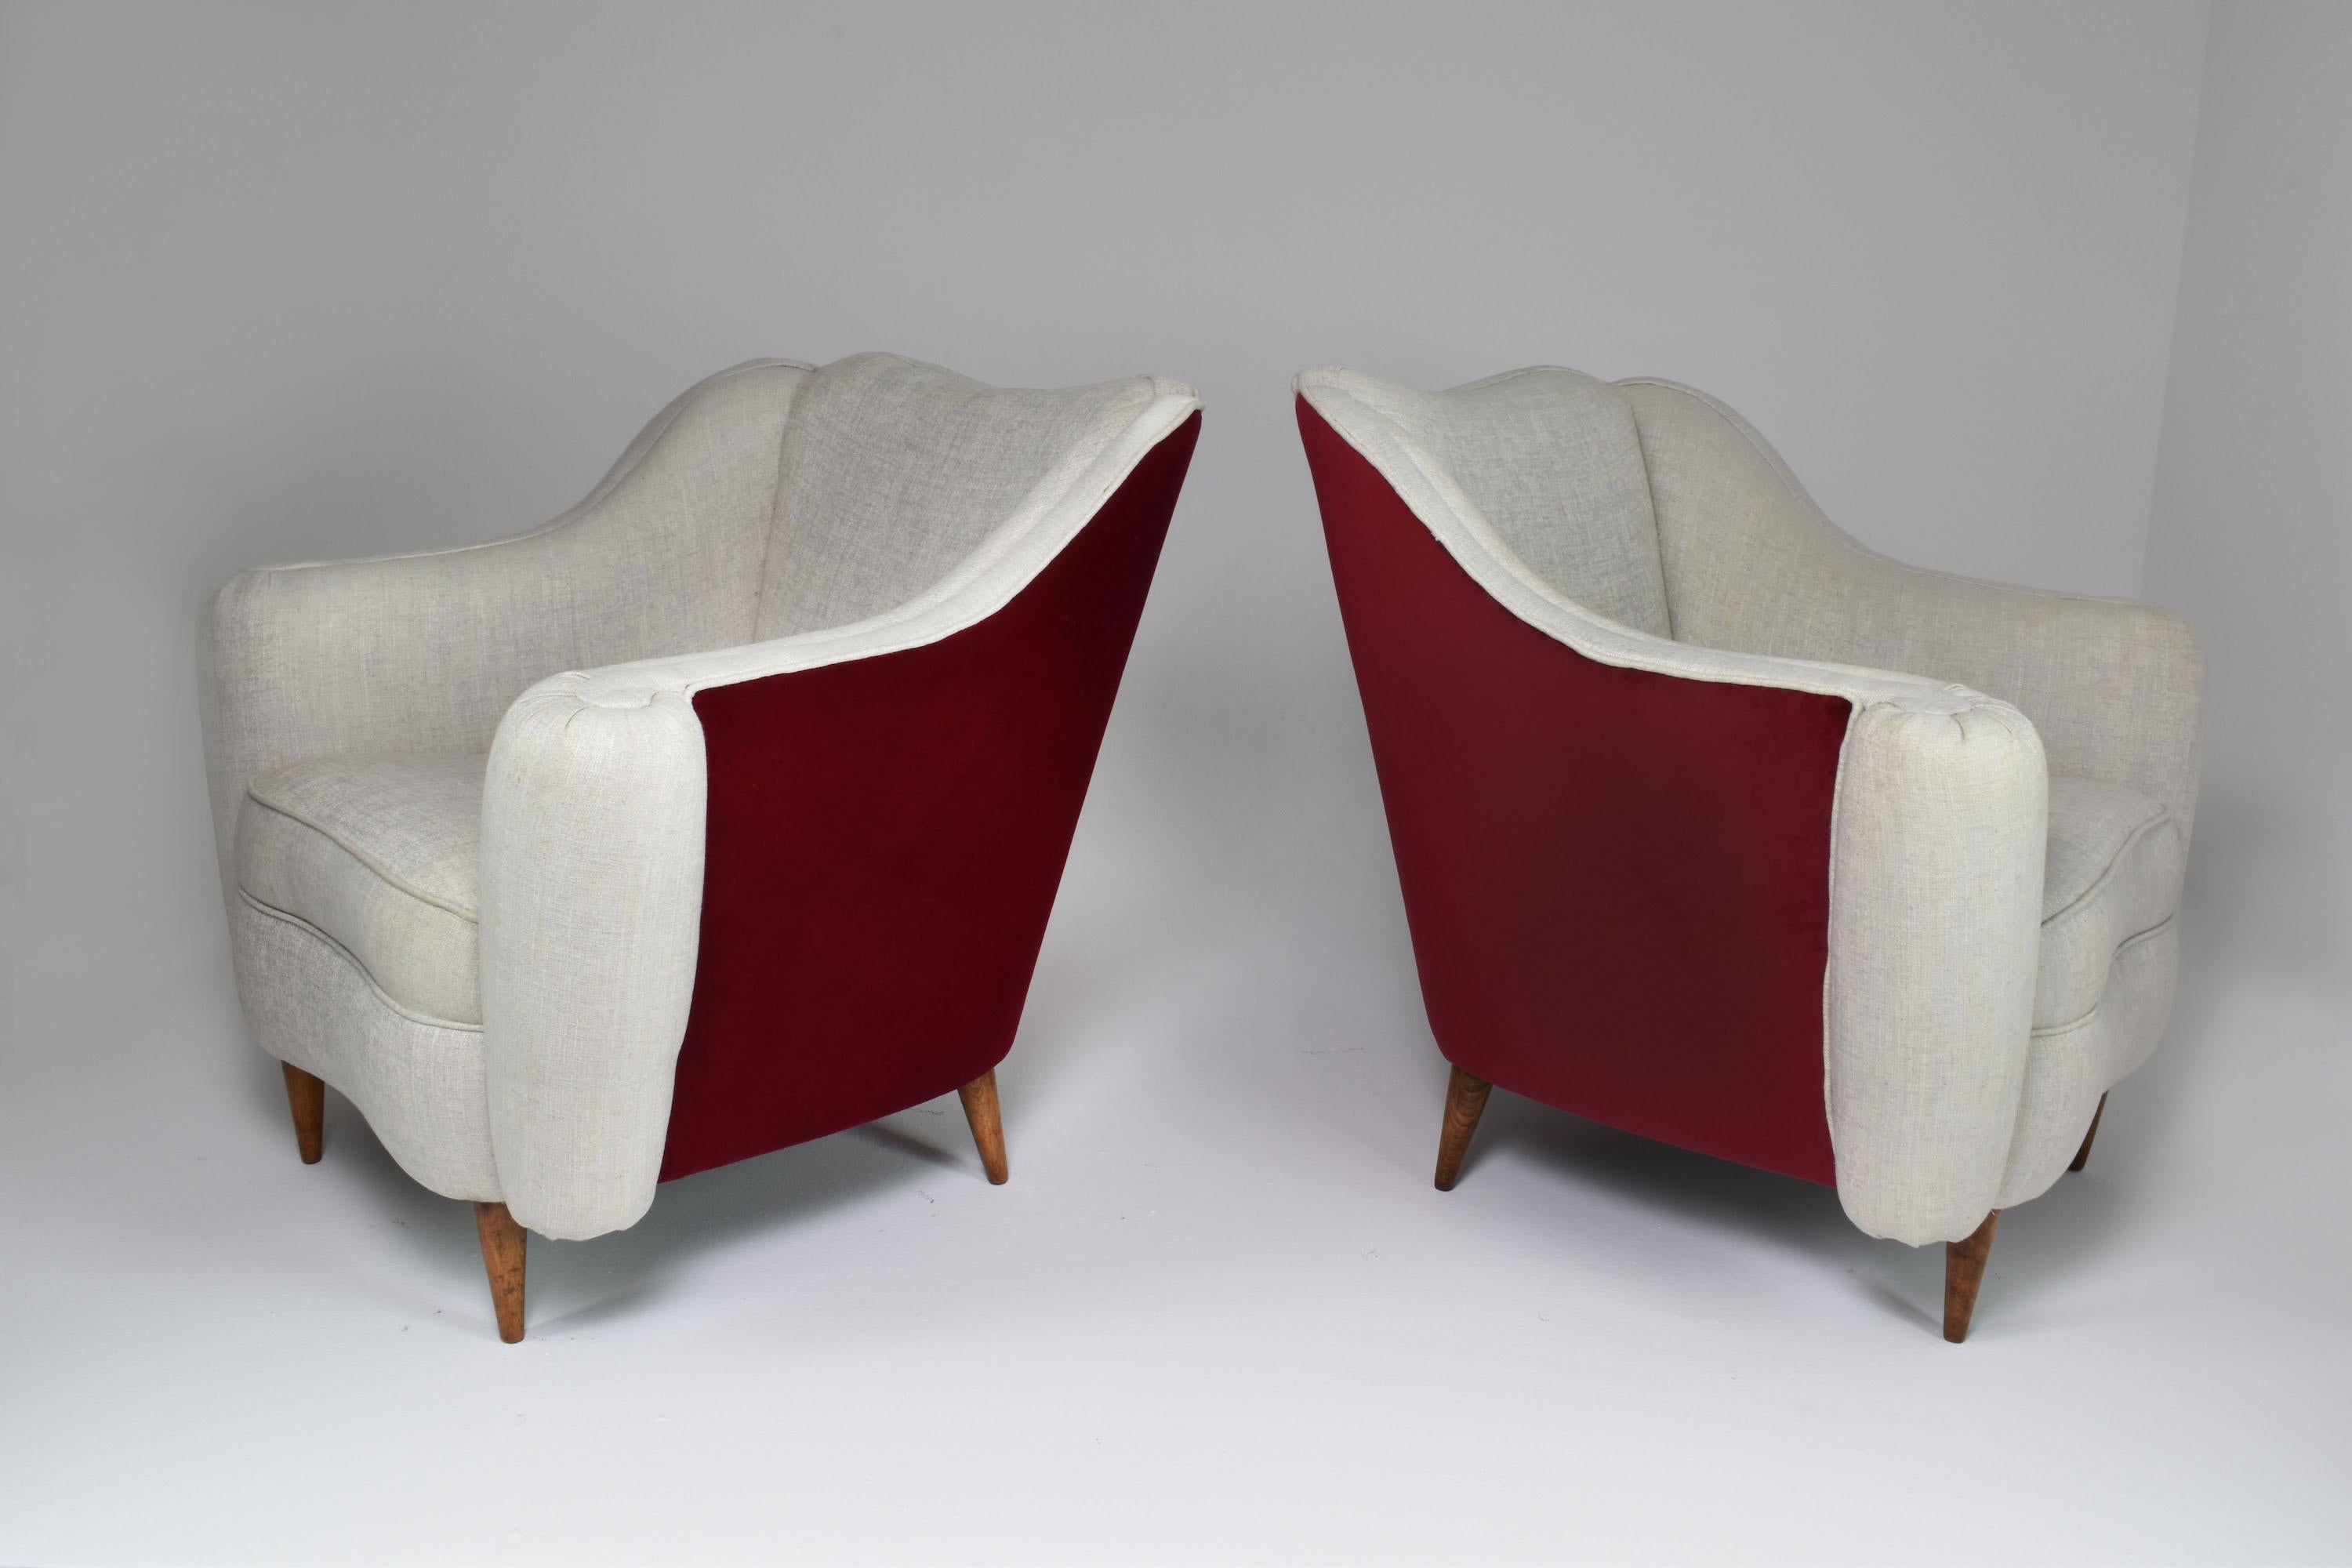 A captivating pair of 1950s Italian armchairs, restored and attributed to Gio Ponti, for Casa e Giardino. These collectable lounge chairs are adorned with gracefully curved backrests and armrests. These seats have been re-upholstered in a